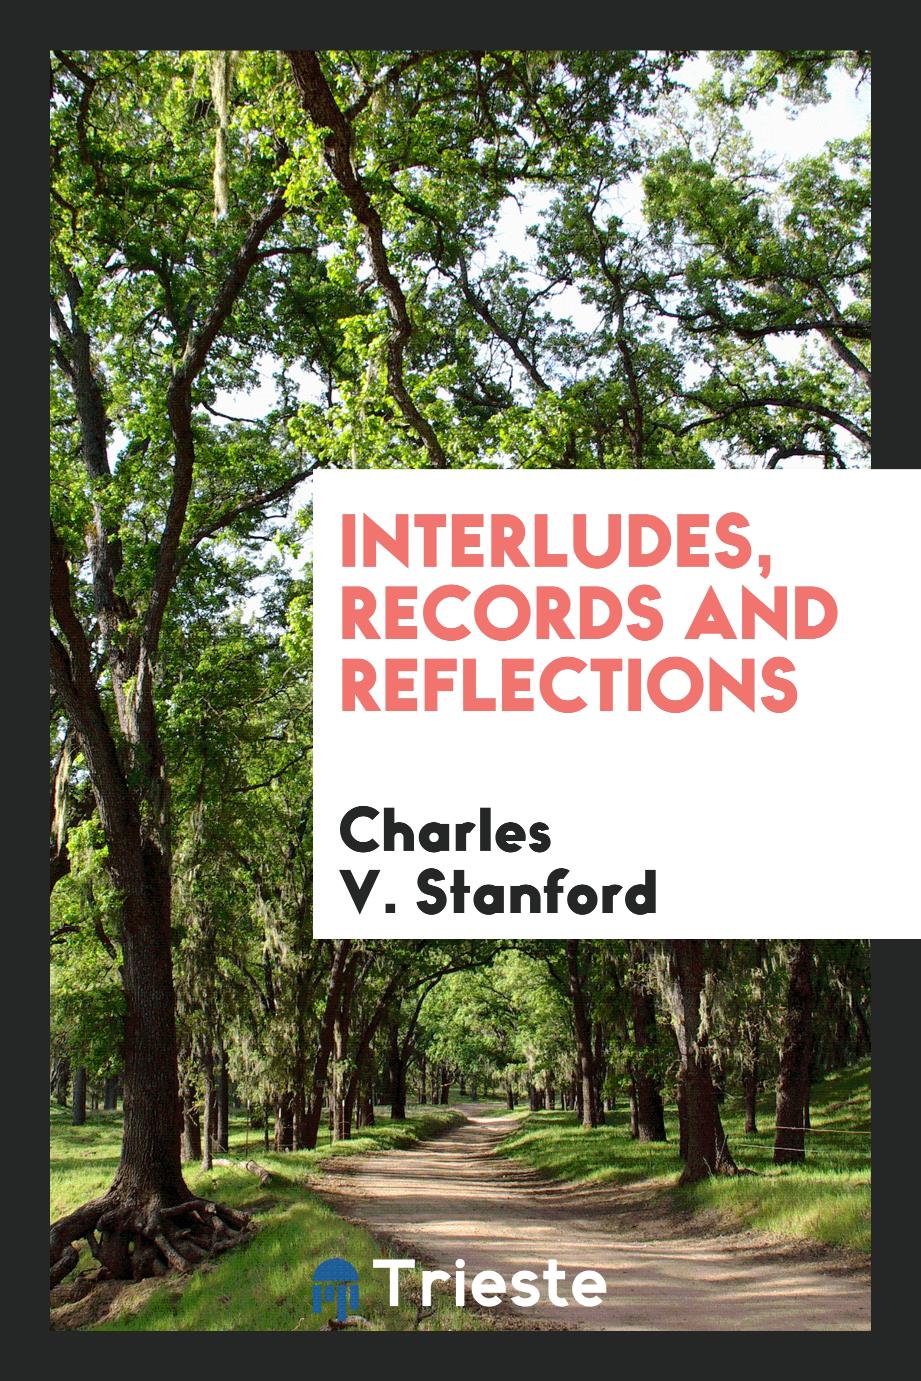 Interludes, Records and Reflections